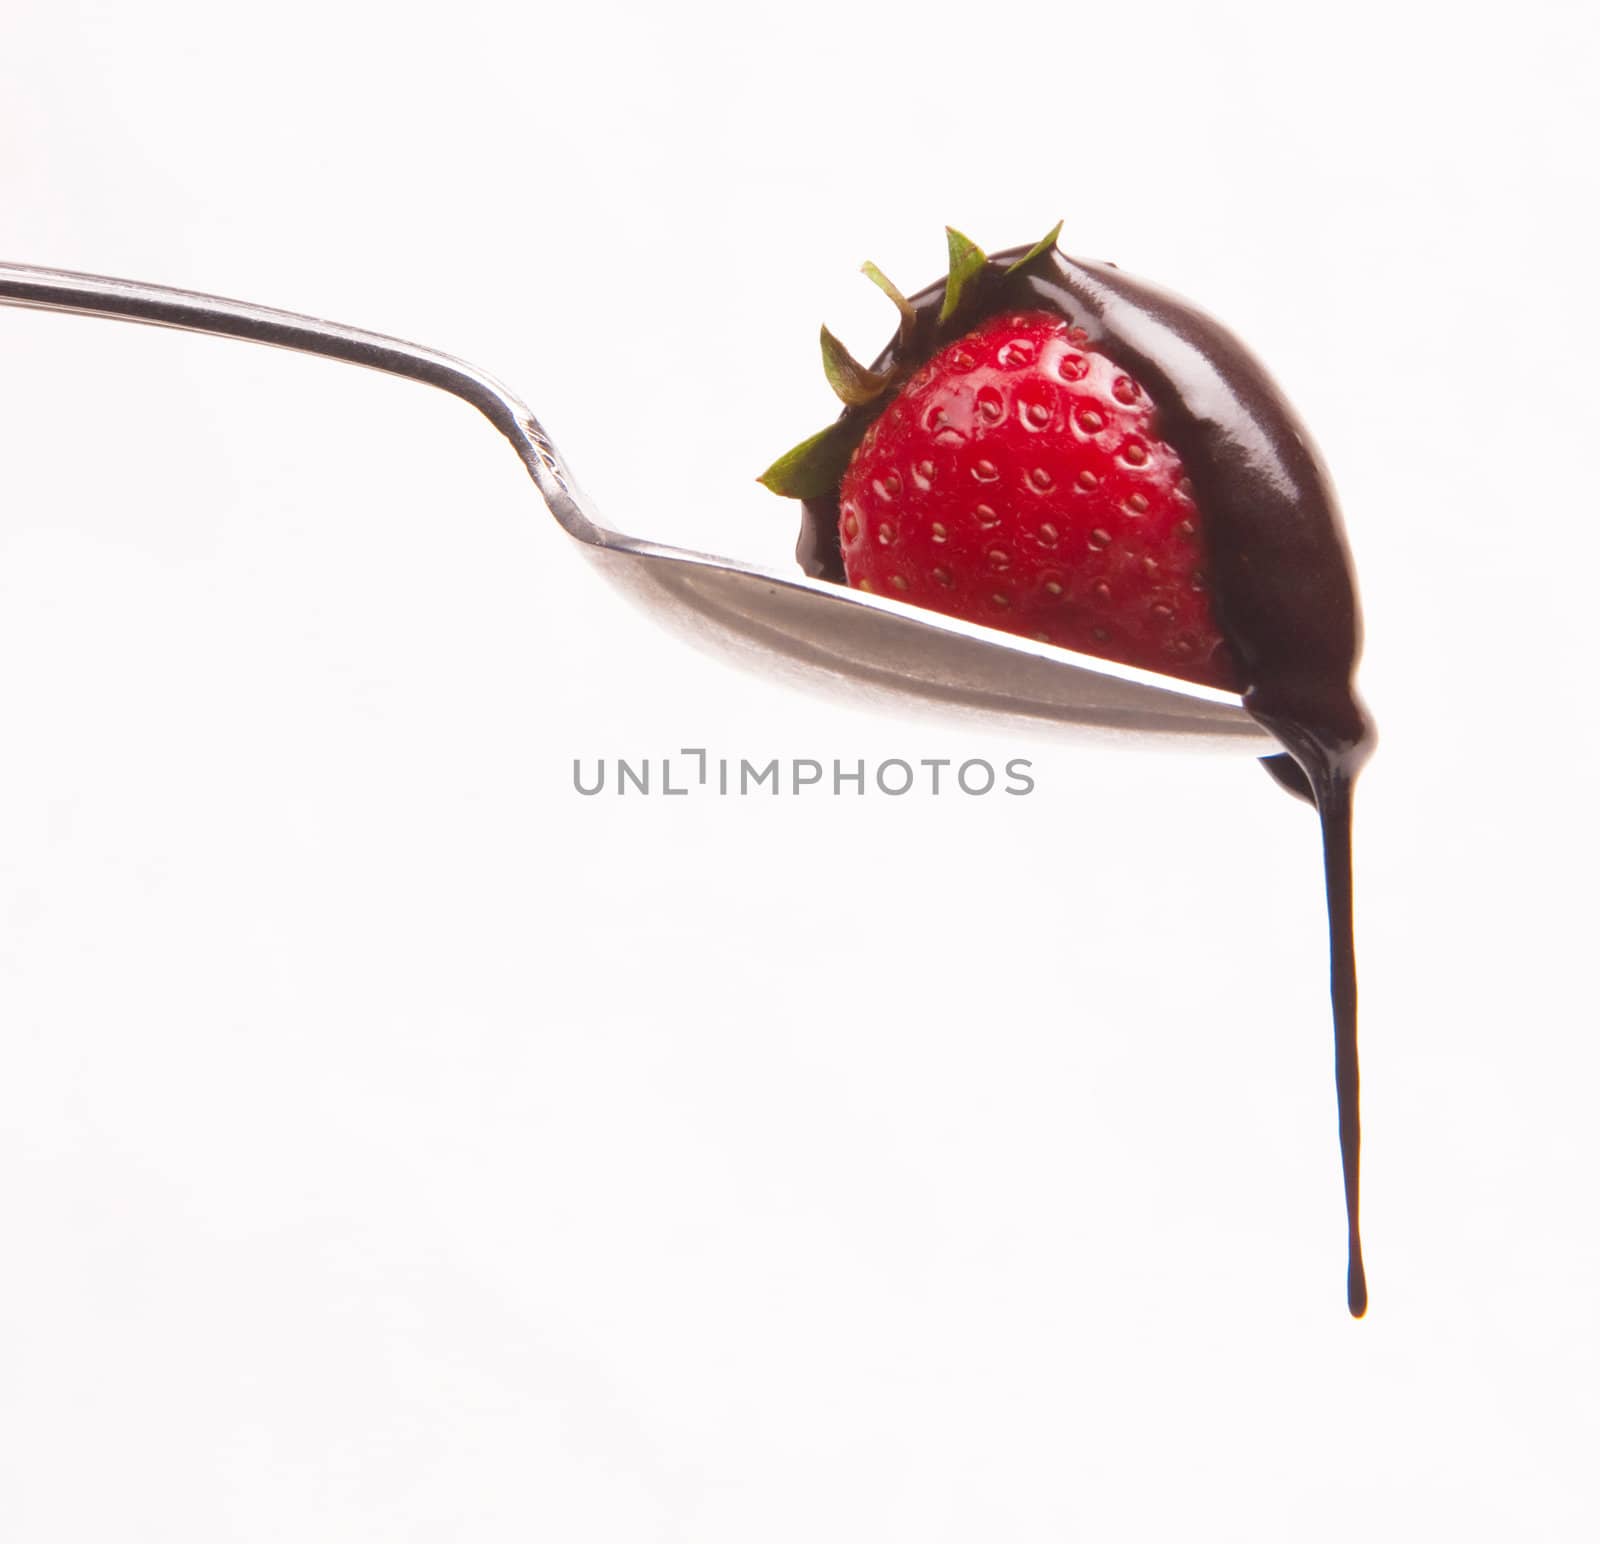 A piece of fruit in a spoon with chocolatte dropping in